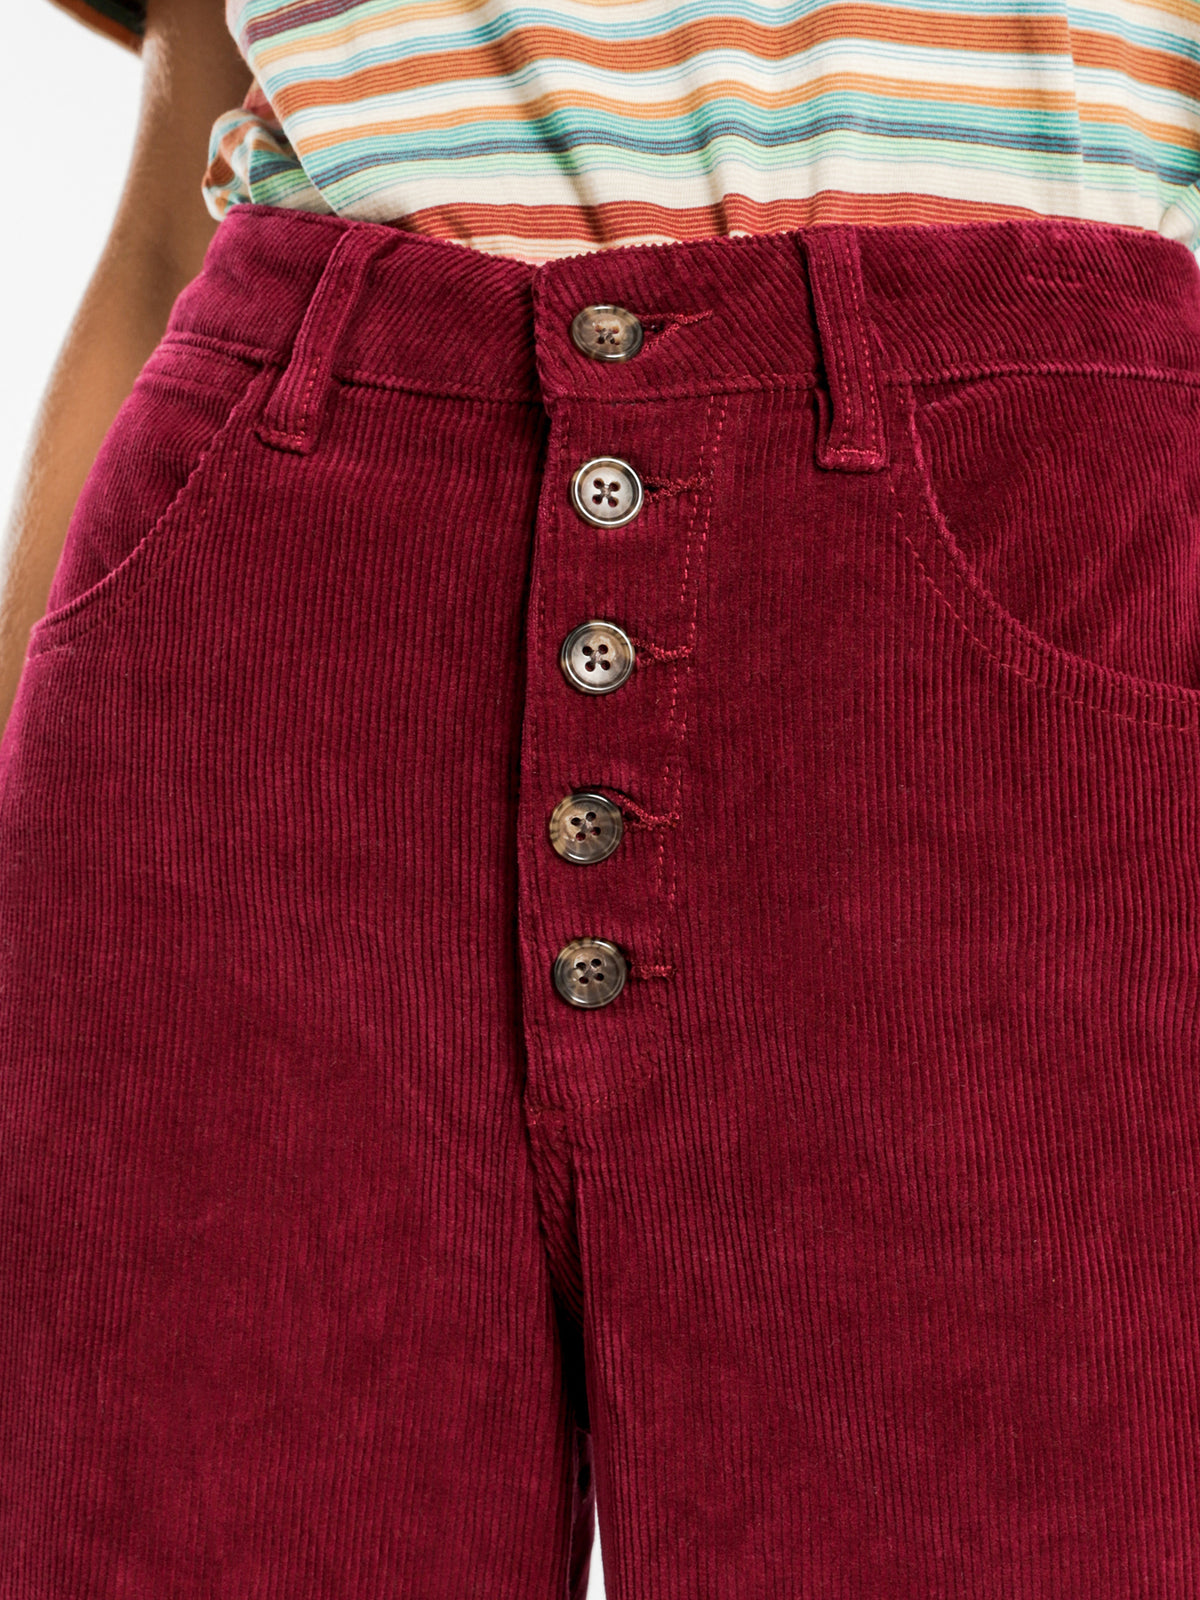 Hi Bells Cropped Jeans in Red Plum